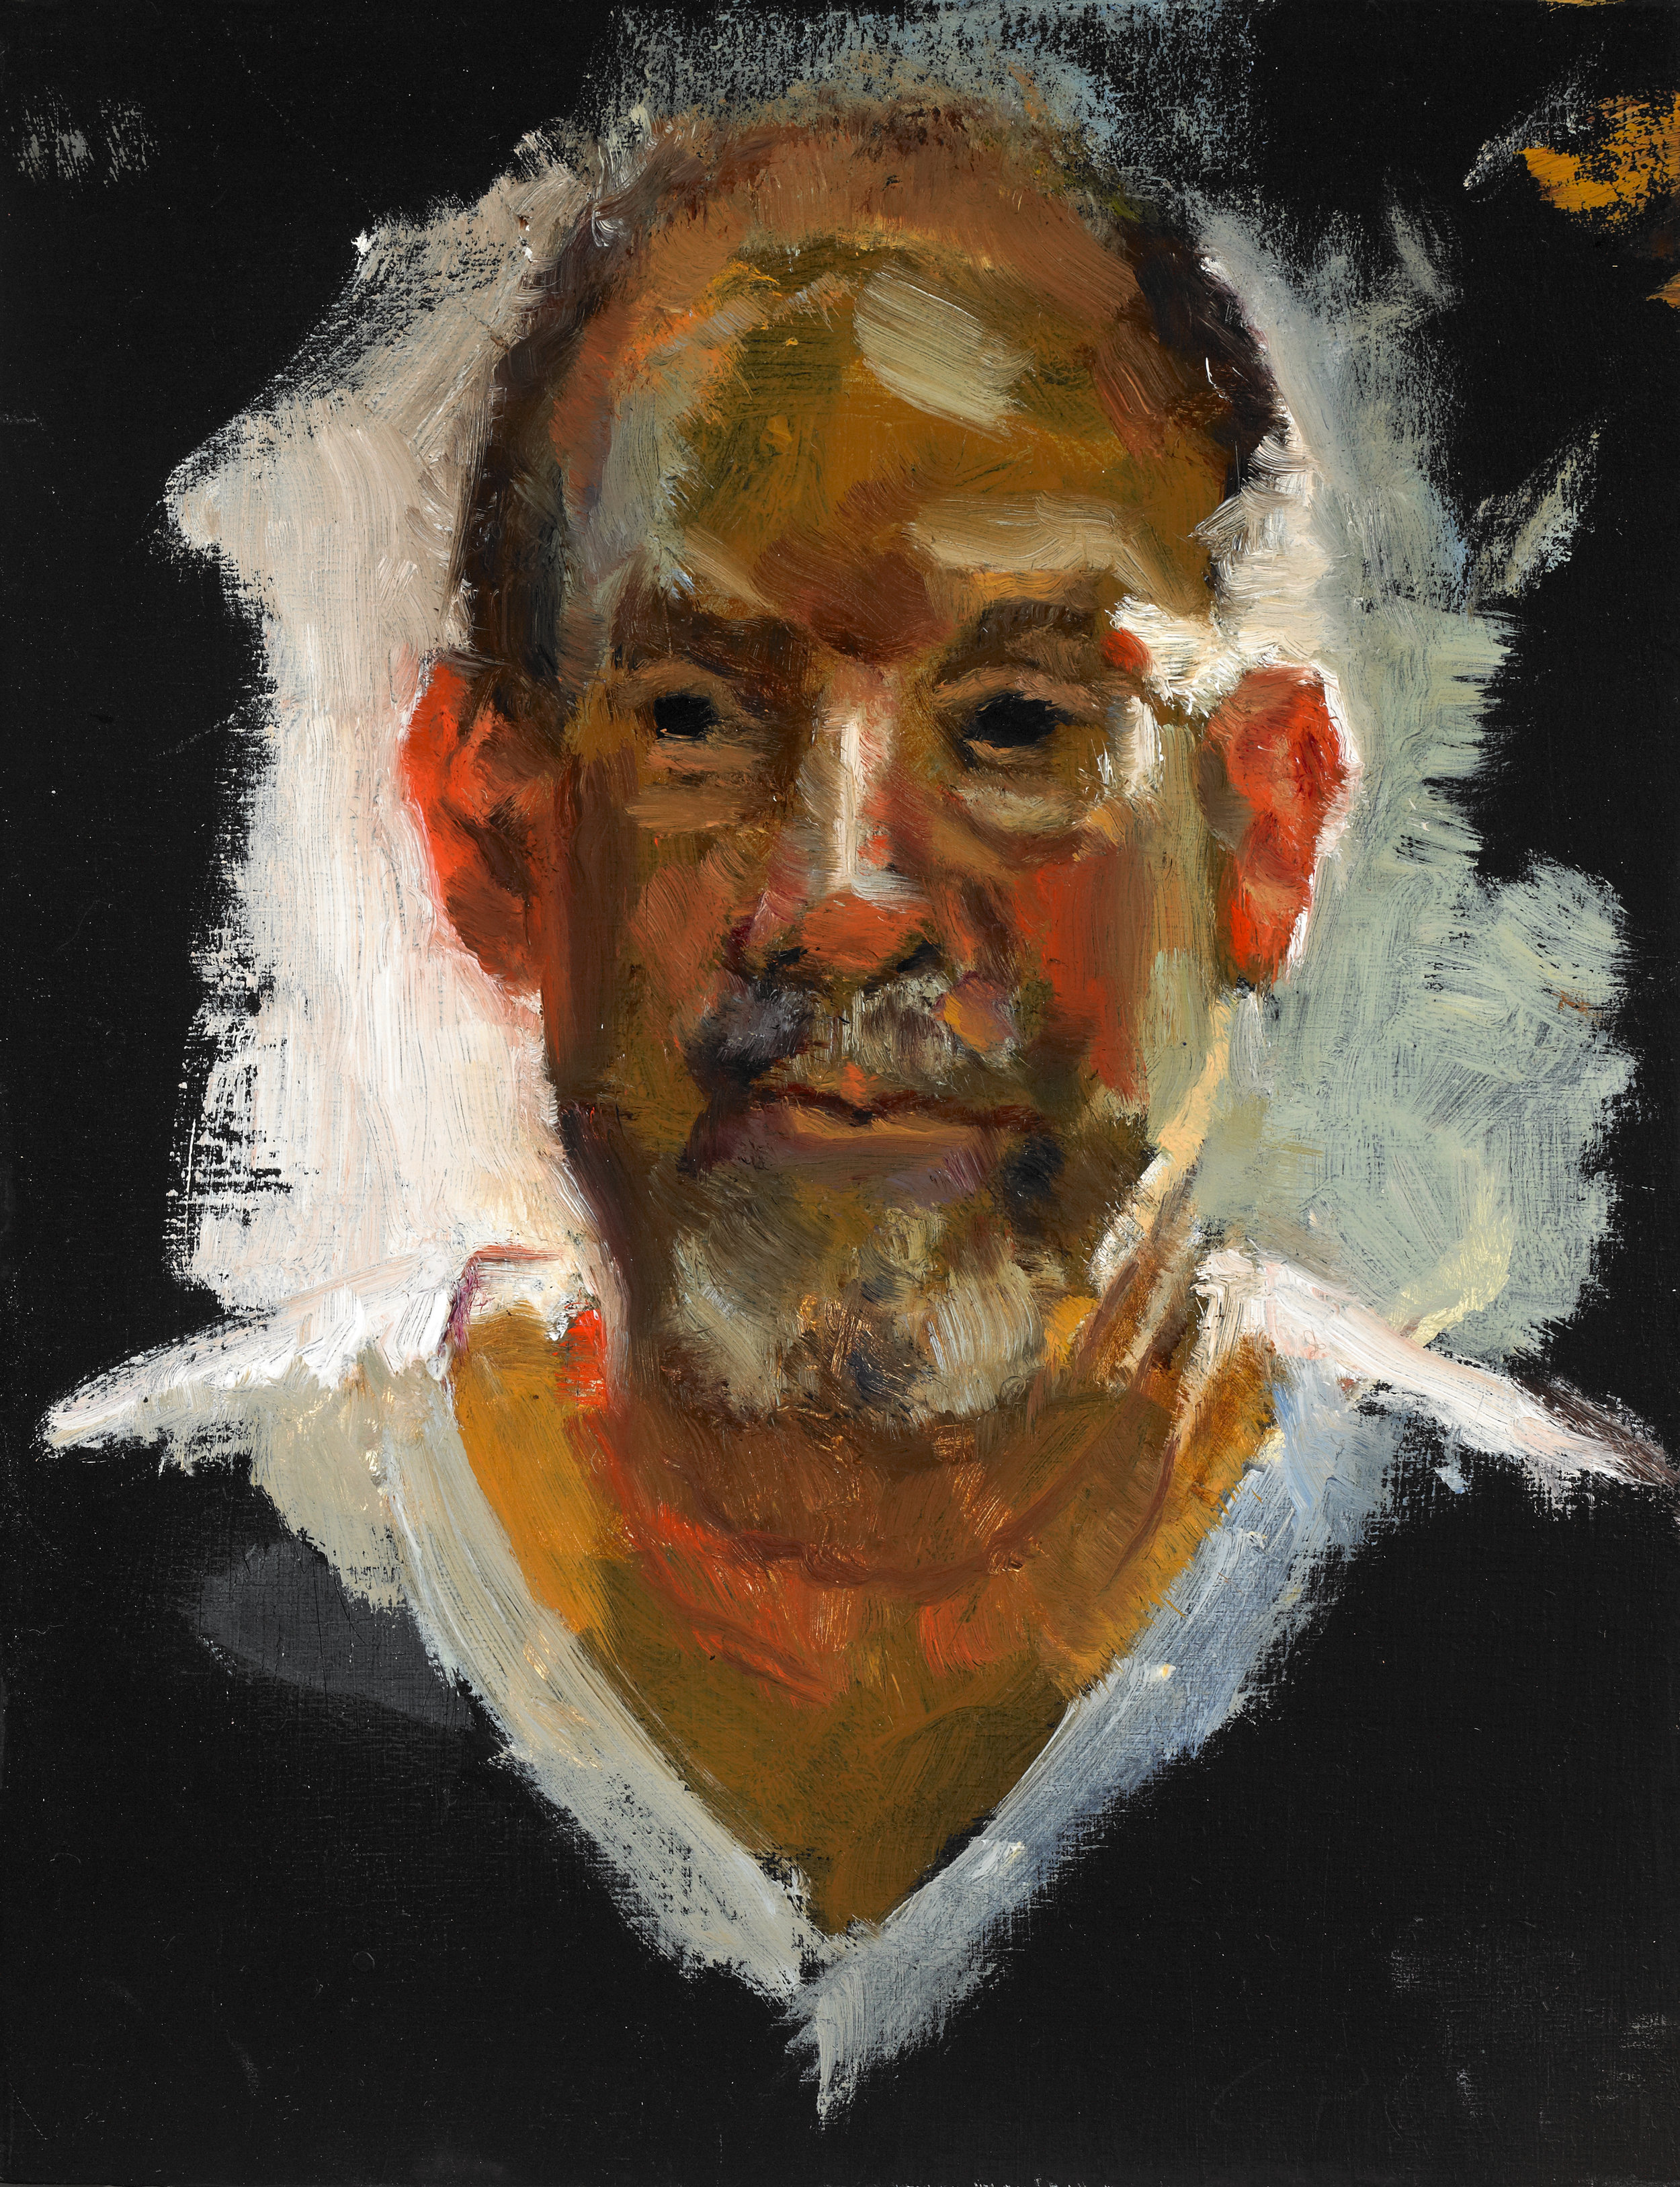   Study of Ted , Oil on Wood Panel. 2011, 6 1/2" x 5" 